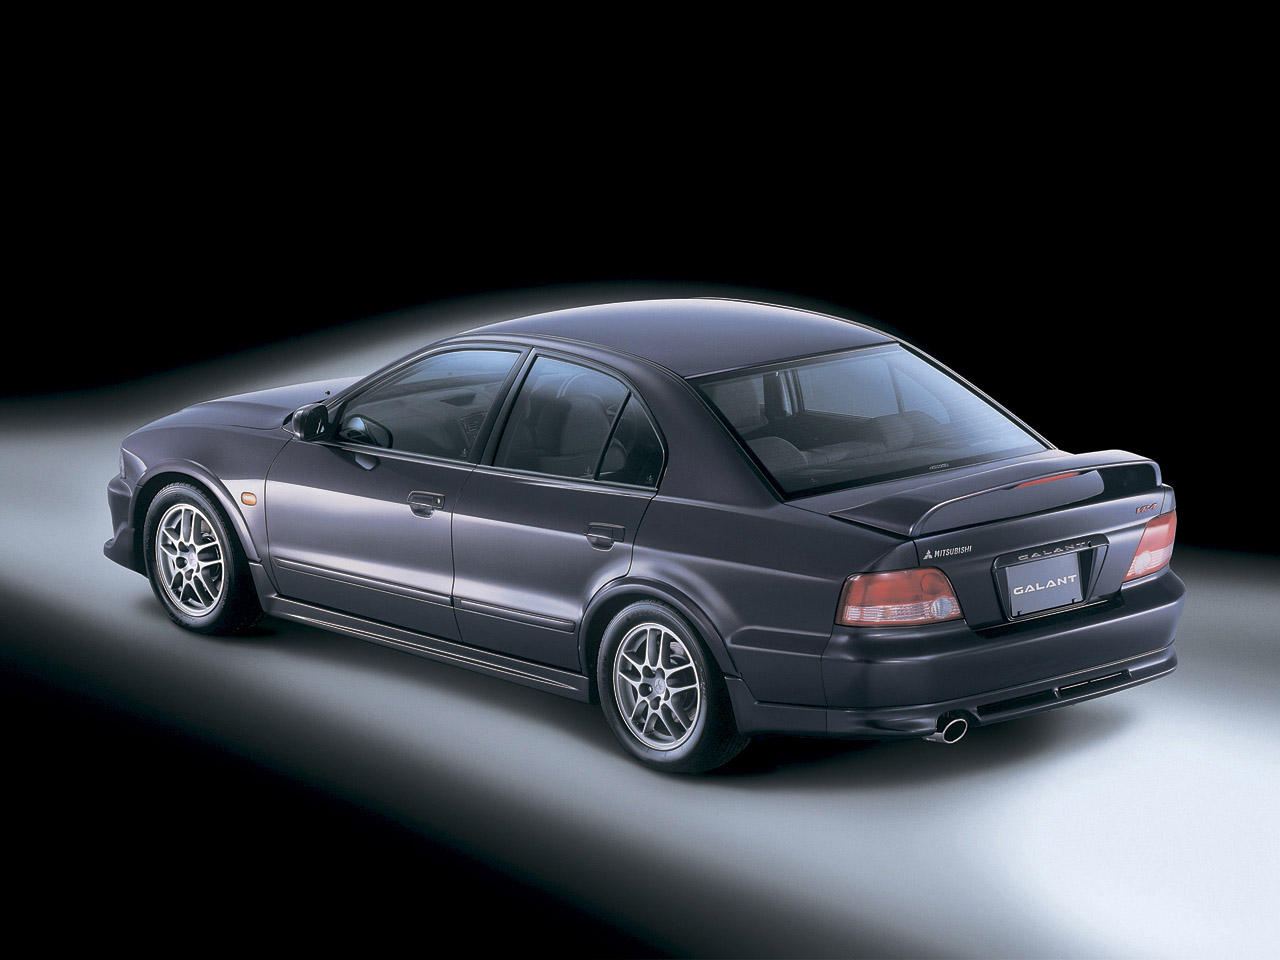 Mitsubishi Galant VR4 Type Spicture 7 , reviews, news